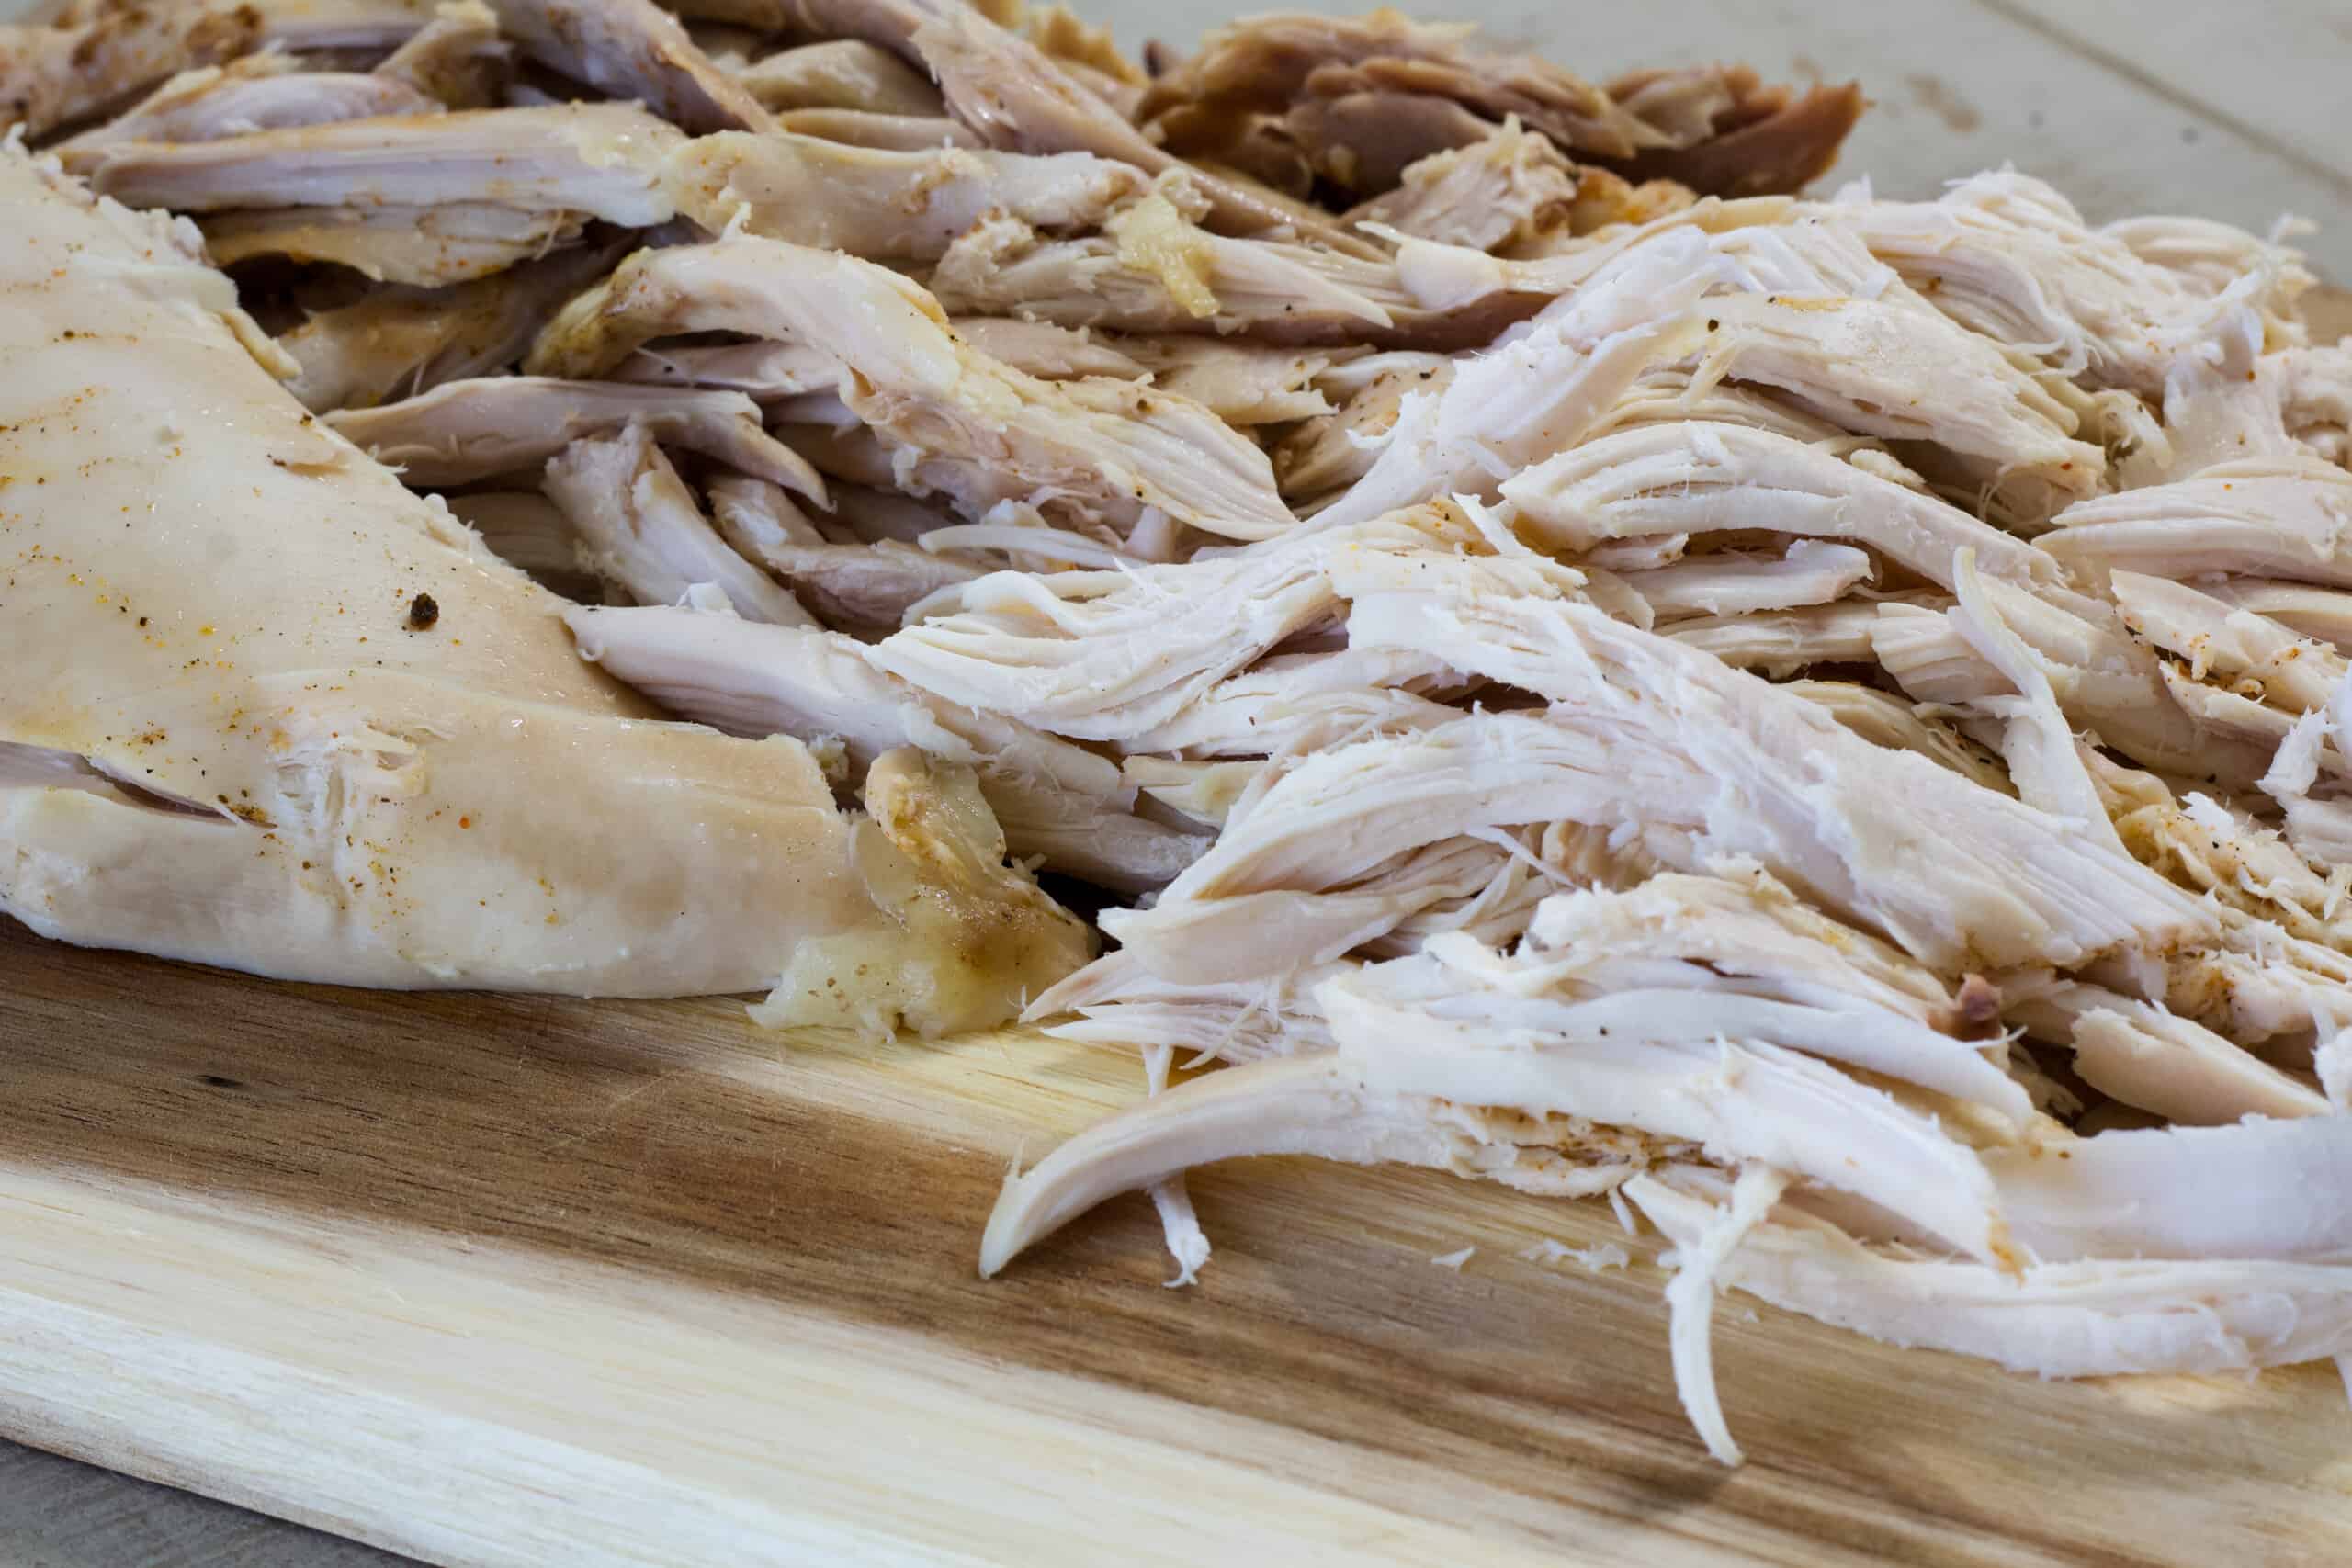 Close up side view of shredded chicken on a wooden cutting board.